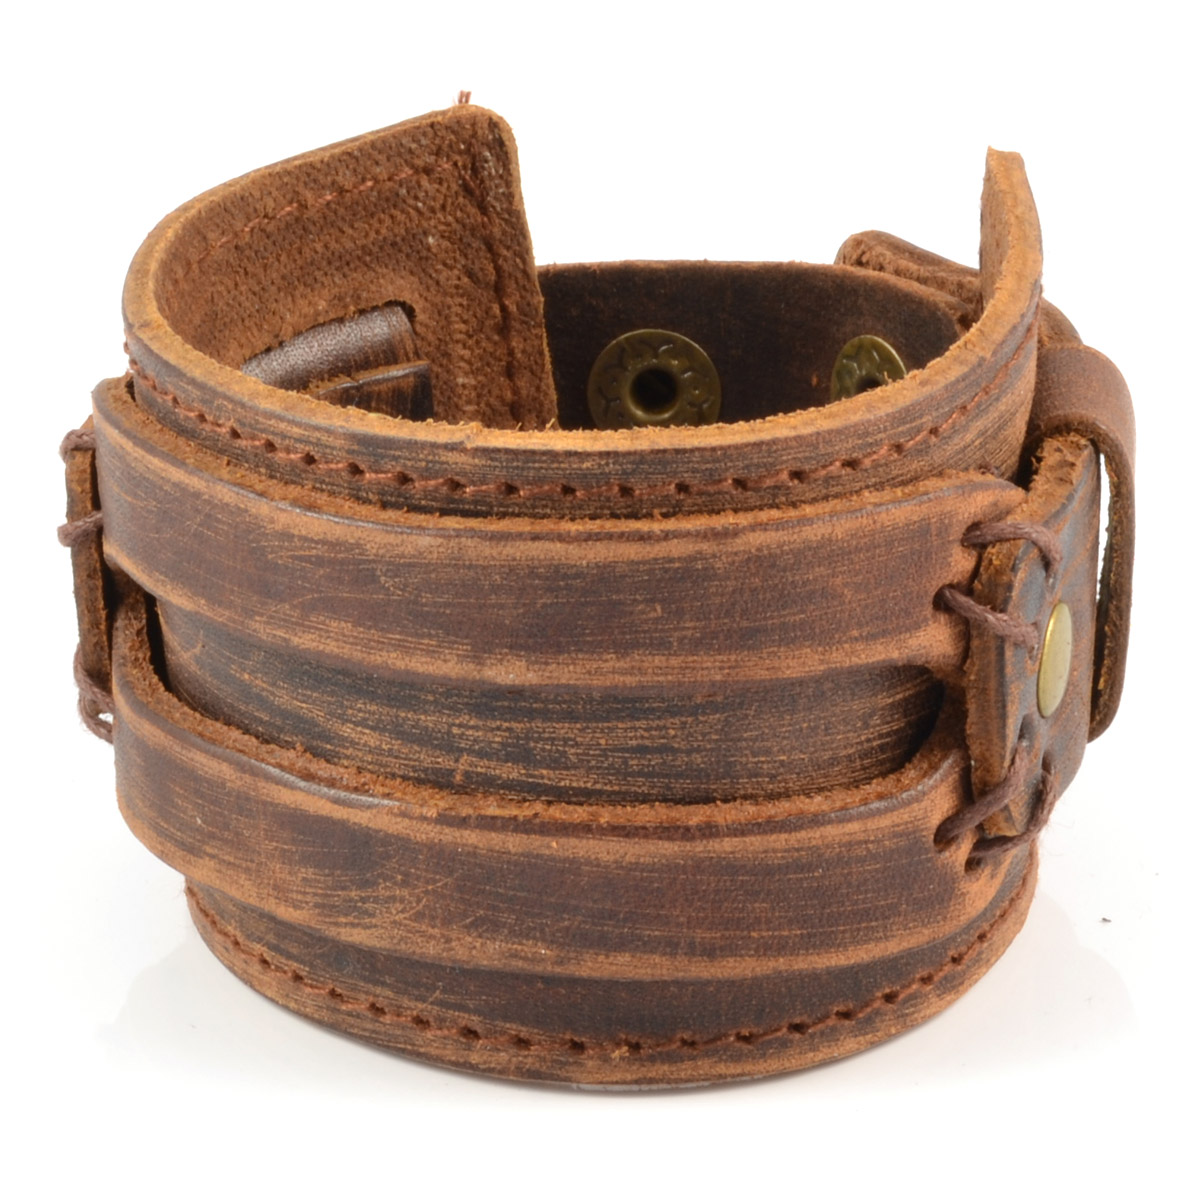 Accentuate masculinity and boldness with a thick leather cuff bracelet  ToccoToscano leather bracel  Leather cuffs bracelet Leather bracelet  Leather cuffs